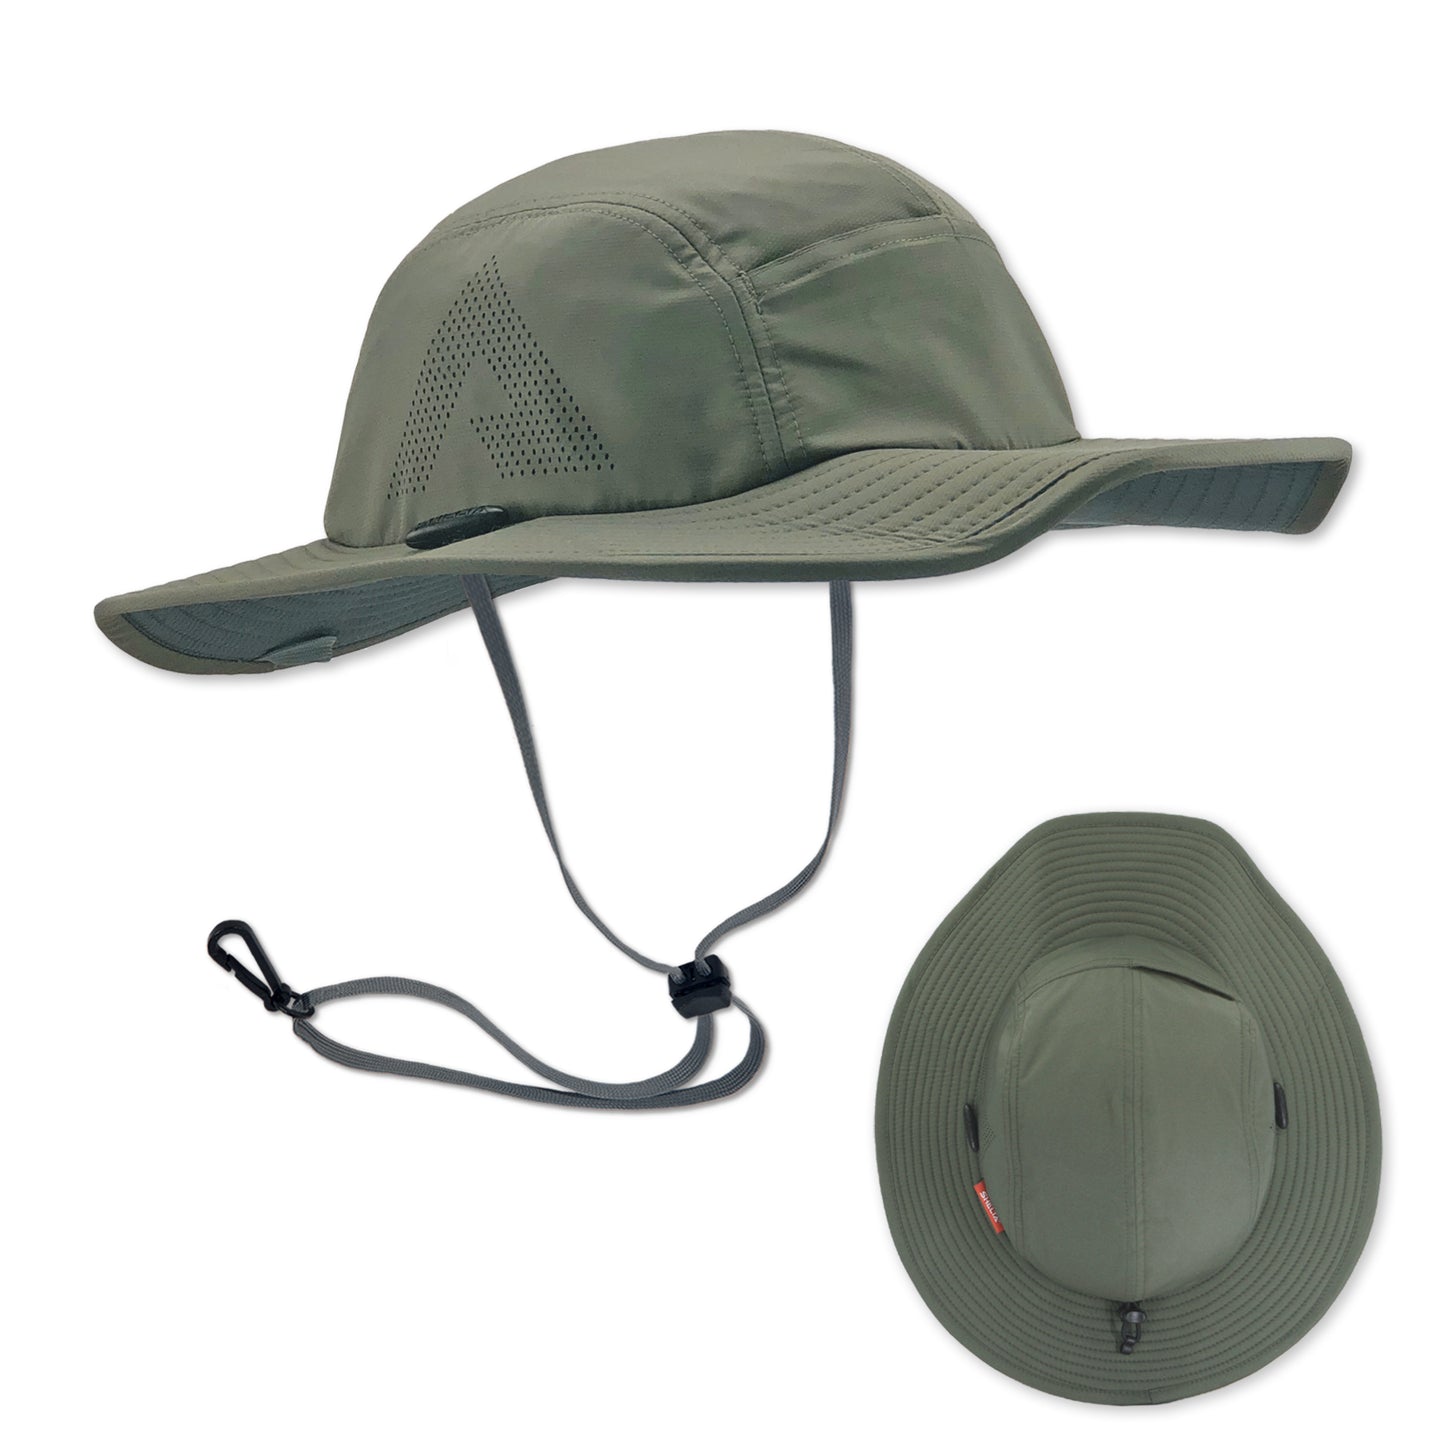 Shelta Firebird V2 Sun Hat In the color Dirty Olive